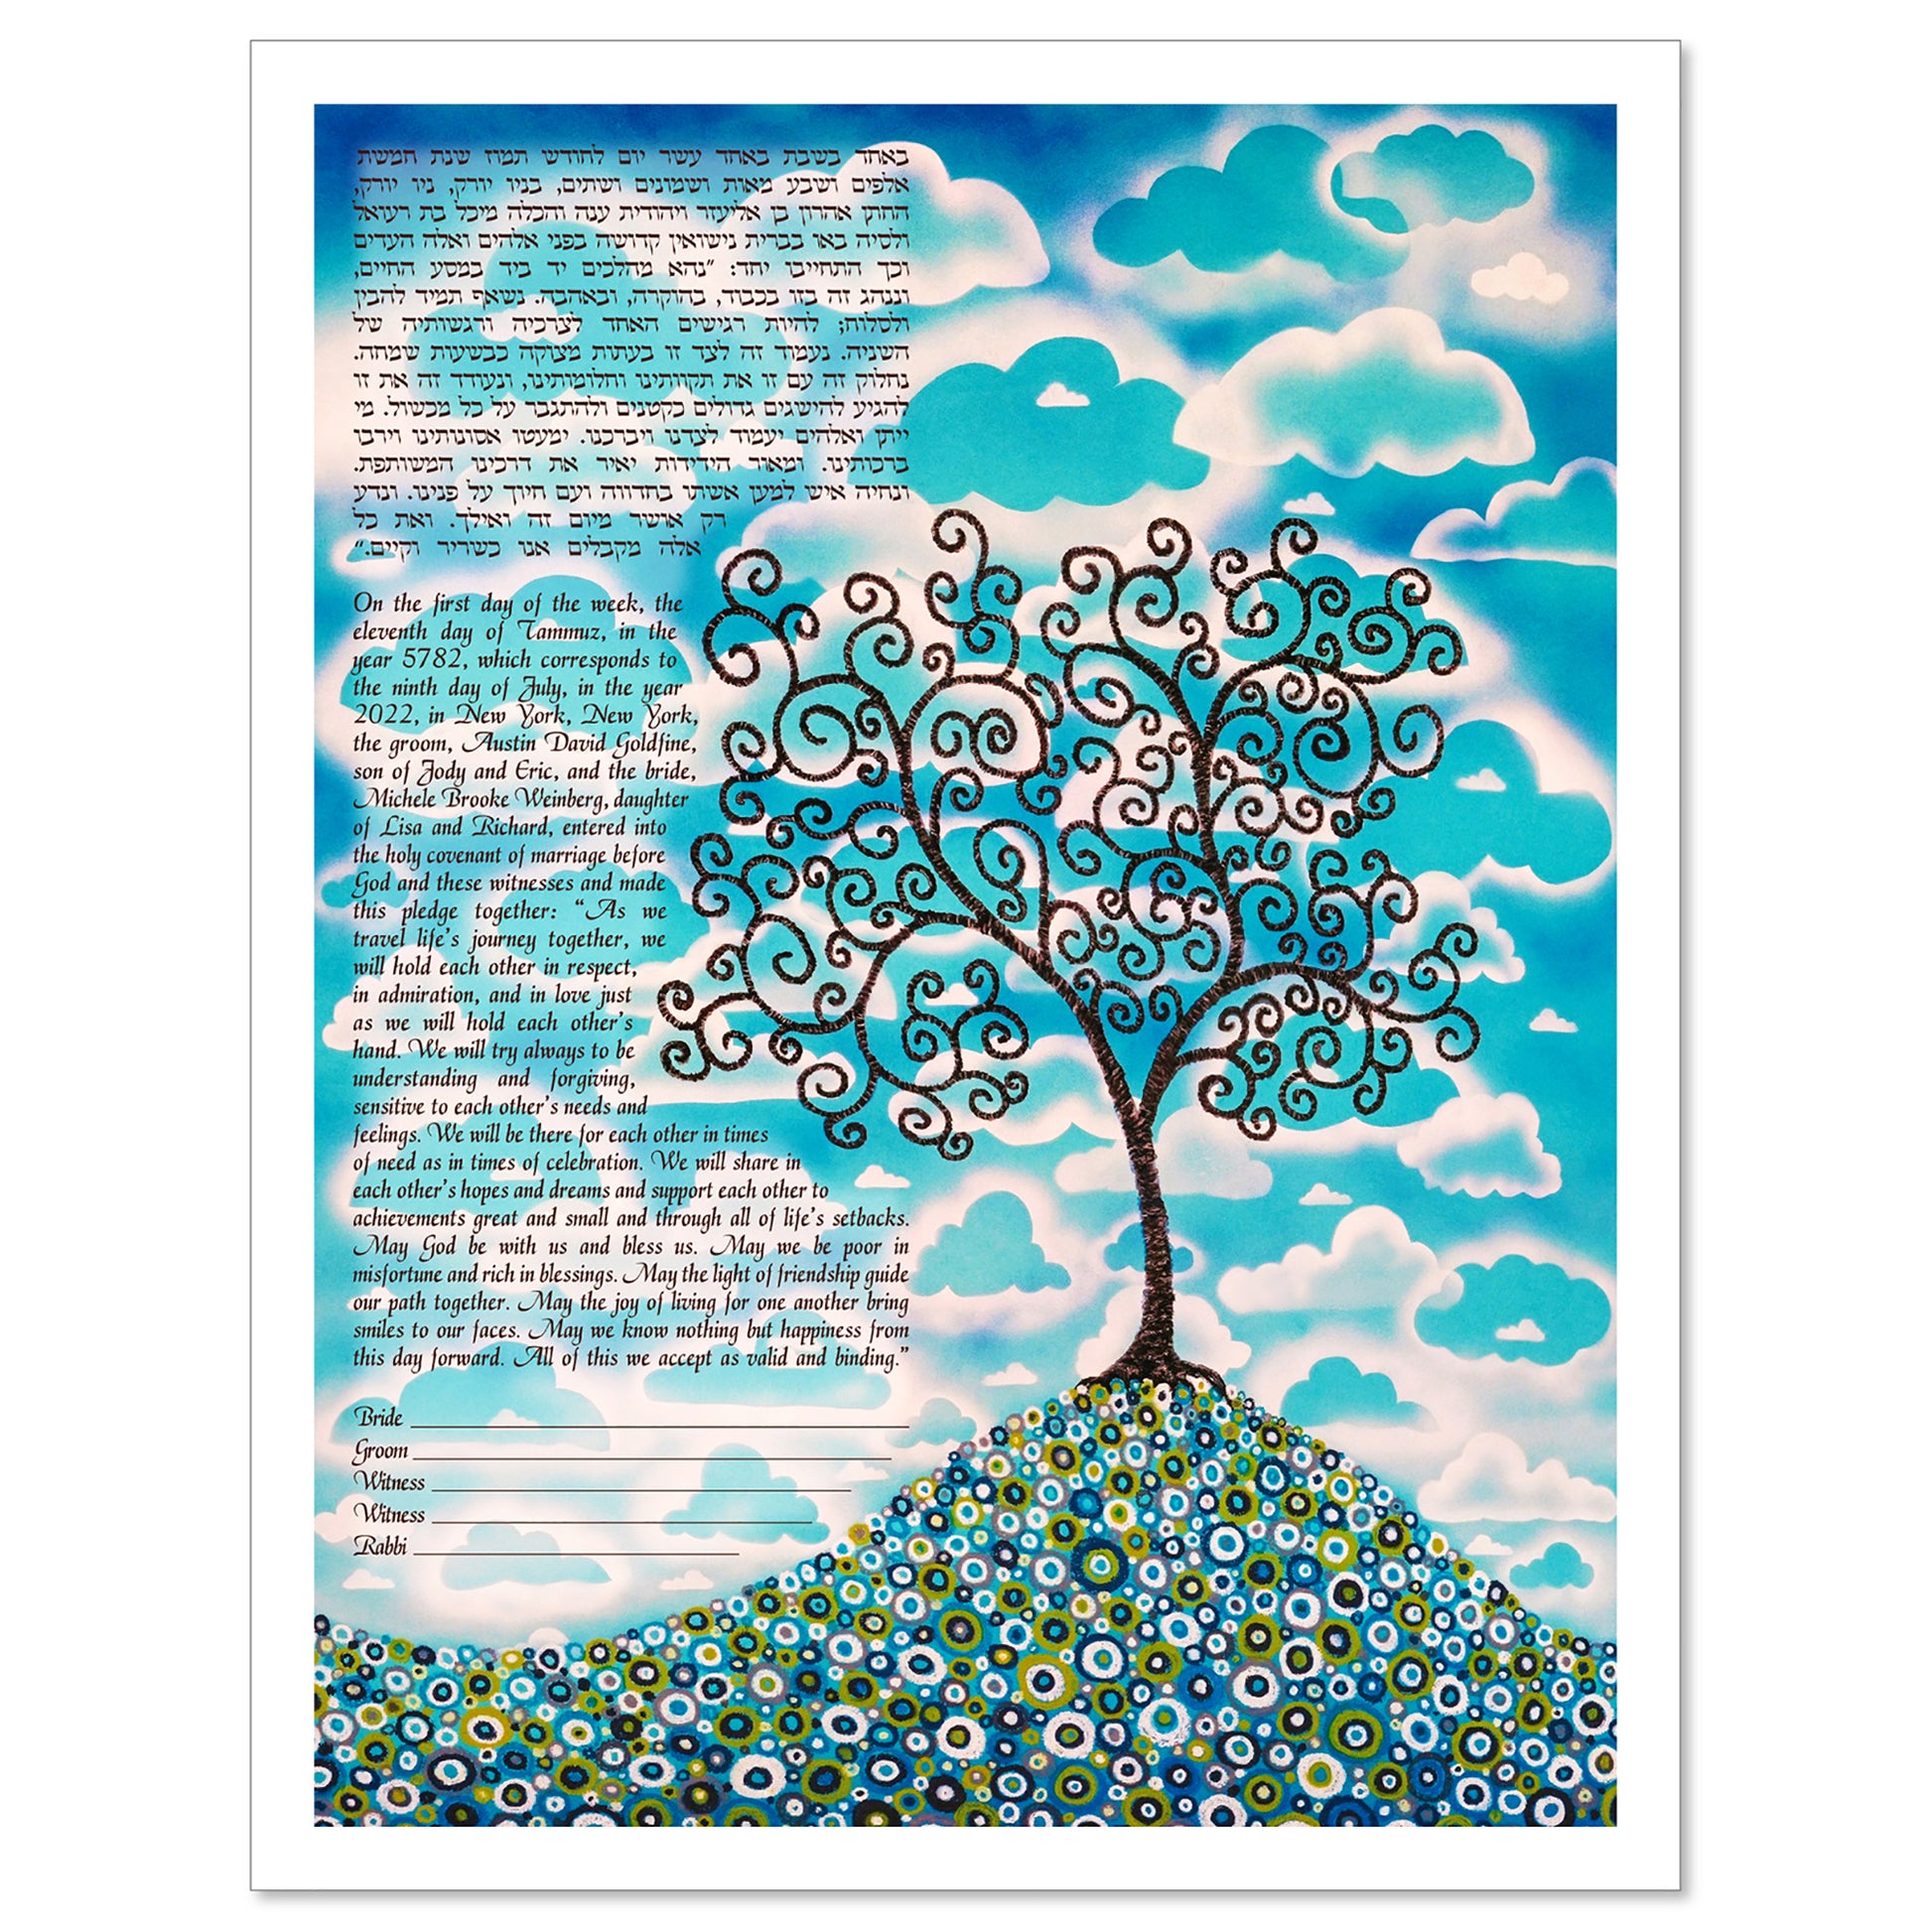 Blue Skies ketubah by Lisa Loudermilk with a abstract tree atop a flowering hillside against a beautiful cloud blue sky.